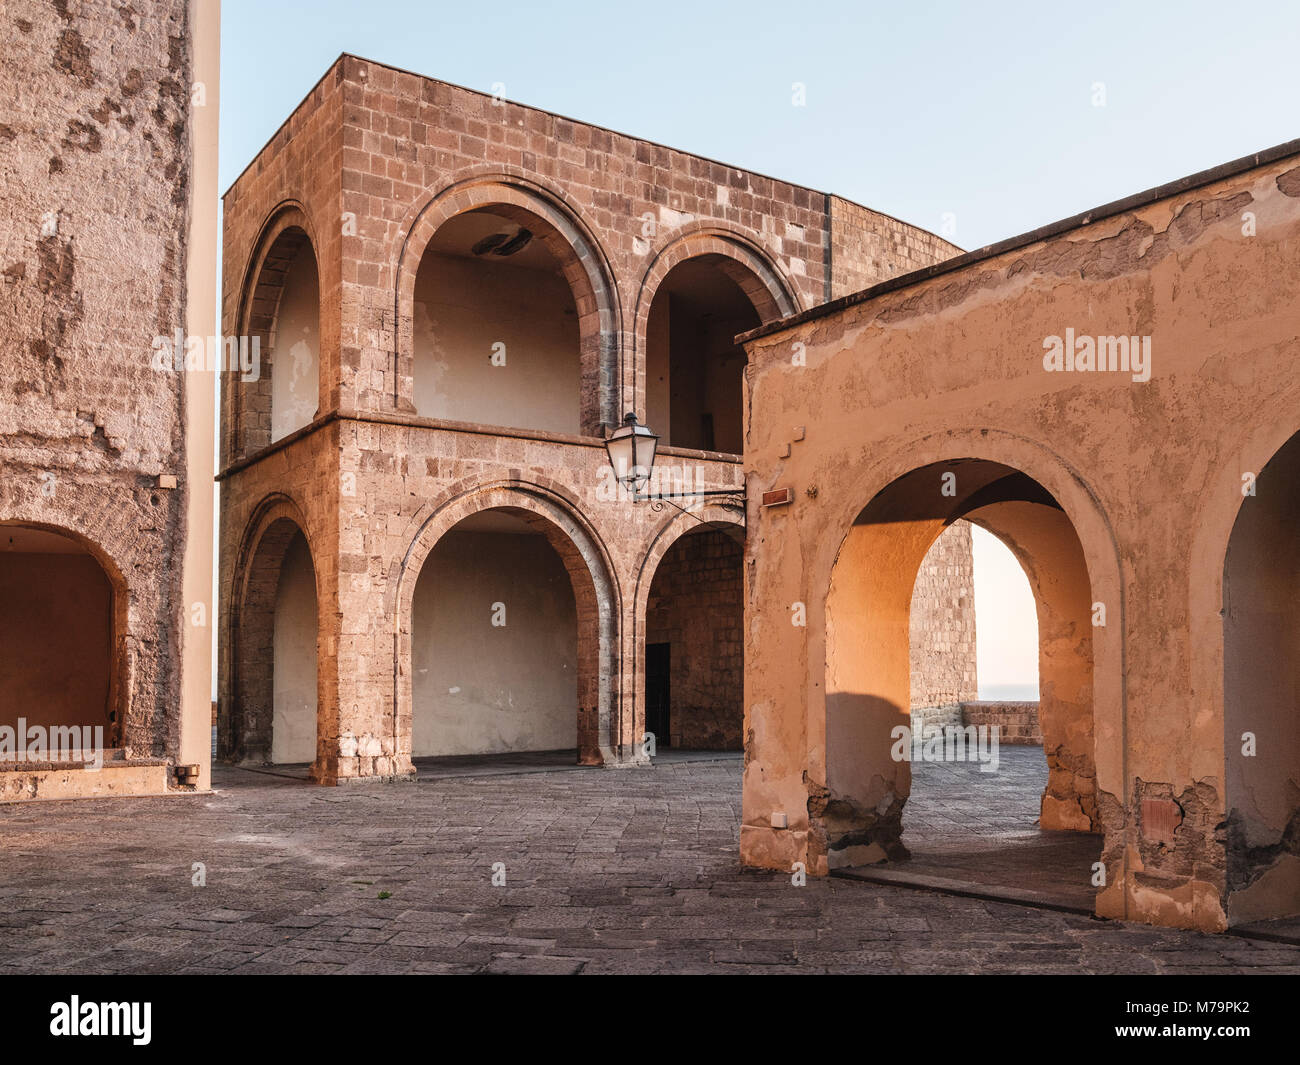 Arched structures in Castel dell'Ovo in Naples, Italy. Stock Photo